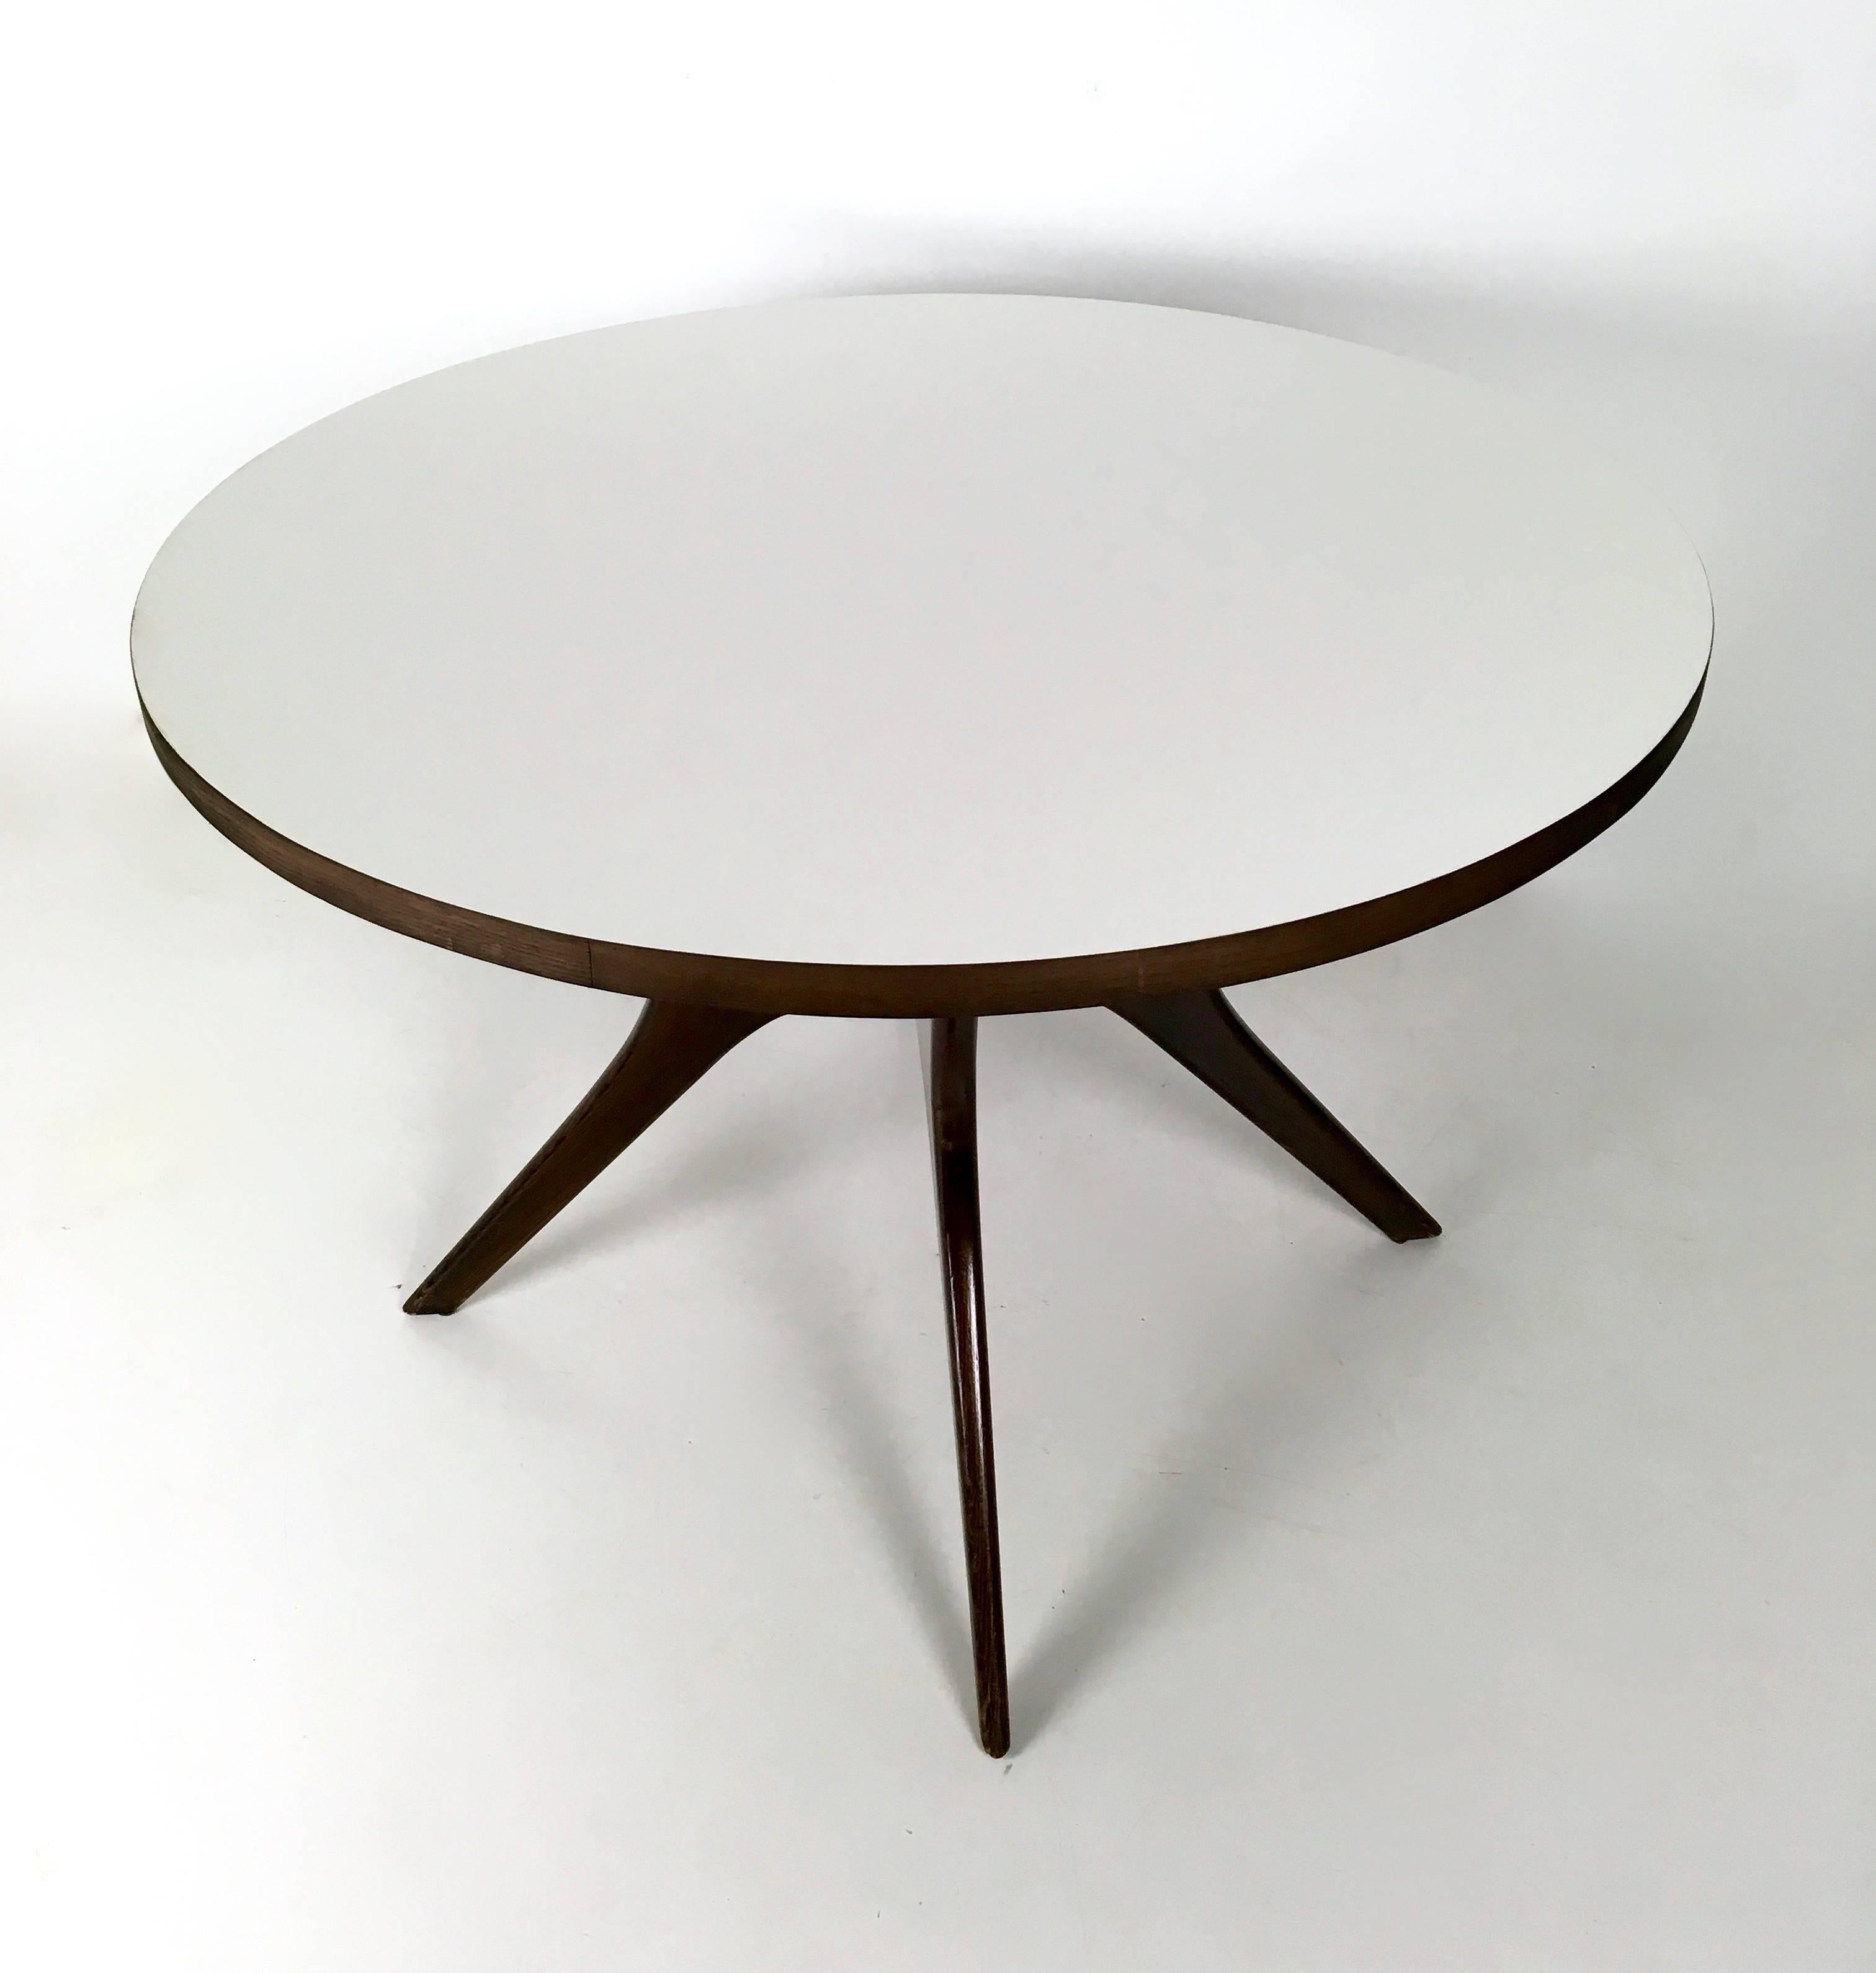 Mid-20th Century Italian Beech and Formica Dining Table, 1950s